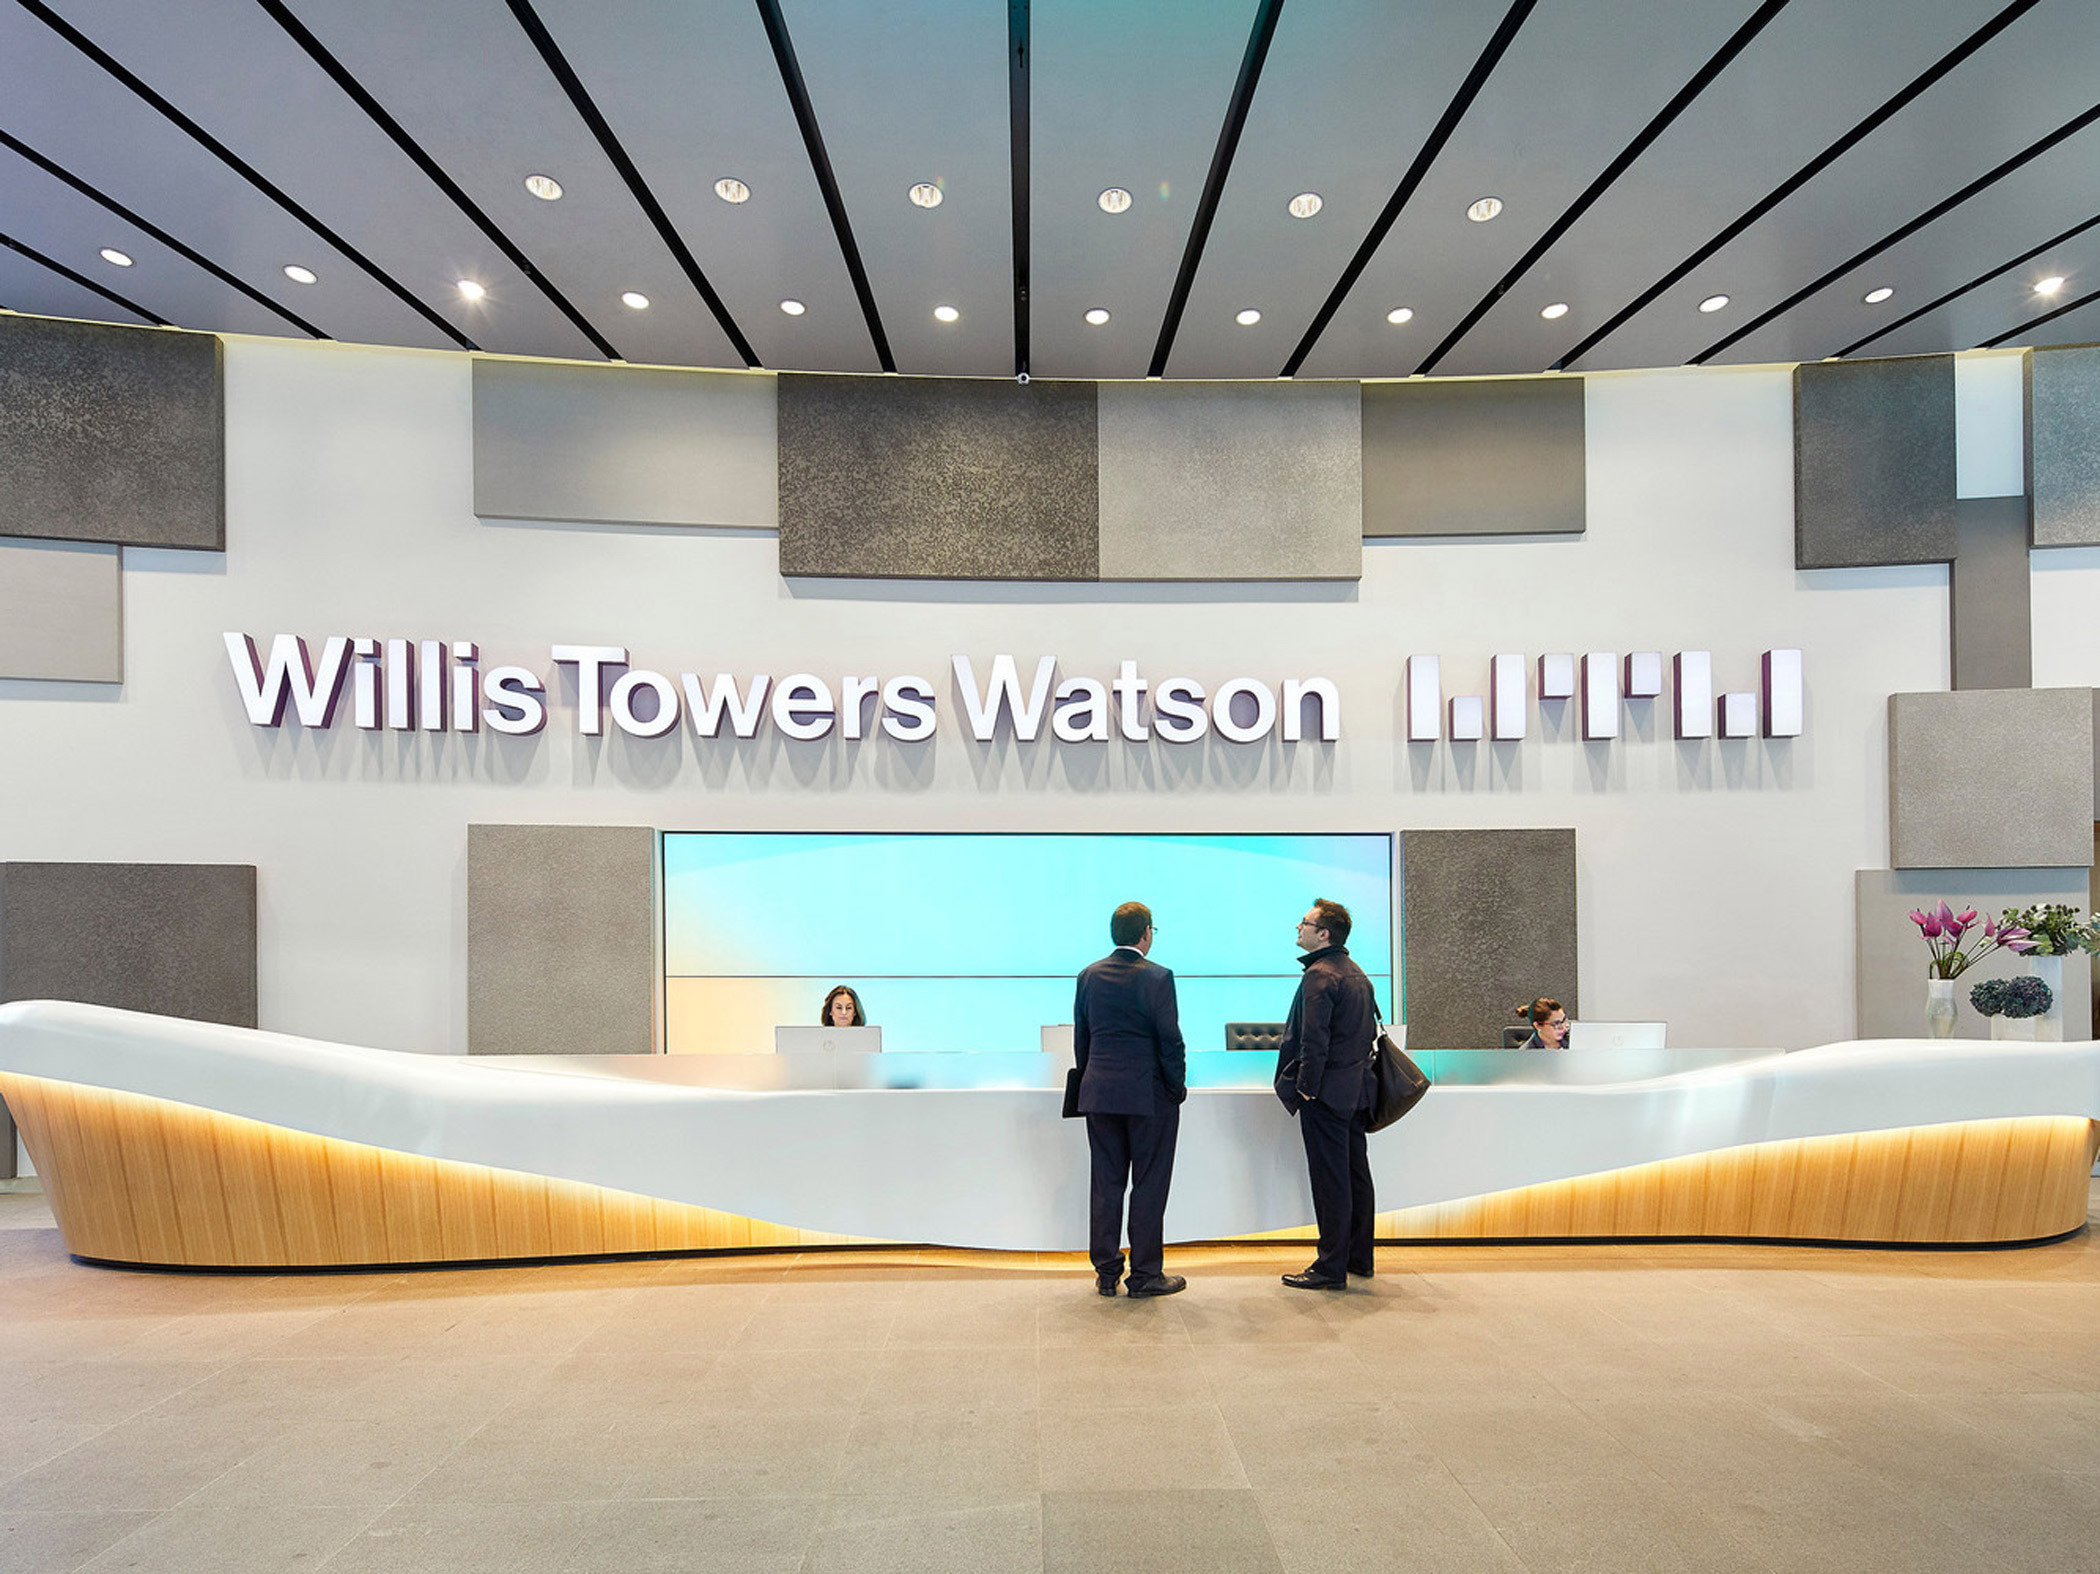 Modern corporate reception area featuring a curved white desk with ambient lighting, flanked by two individuals in business attire. The backdrop showcases the company name, 'Willis Towers Watson,' in large lettering, set against contrasting gray acoustic panels, beneath a sleek strip-lit ceiling.